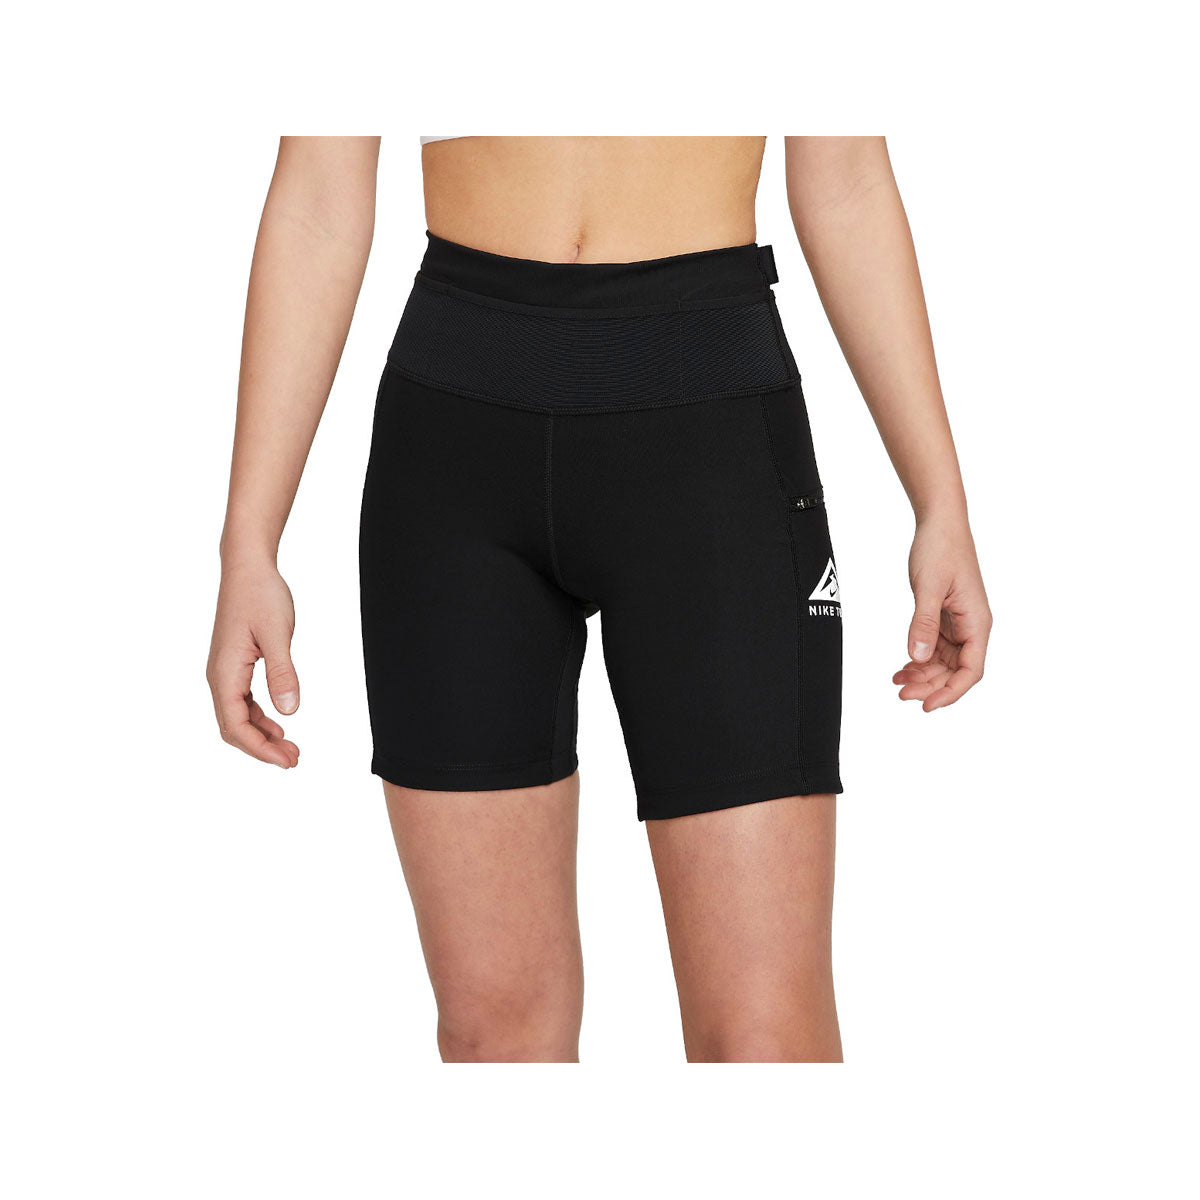 Nike Women's Epic Luxe Trail Tight Shorts